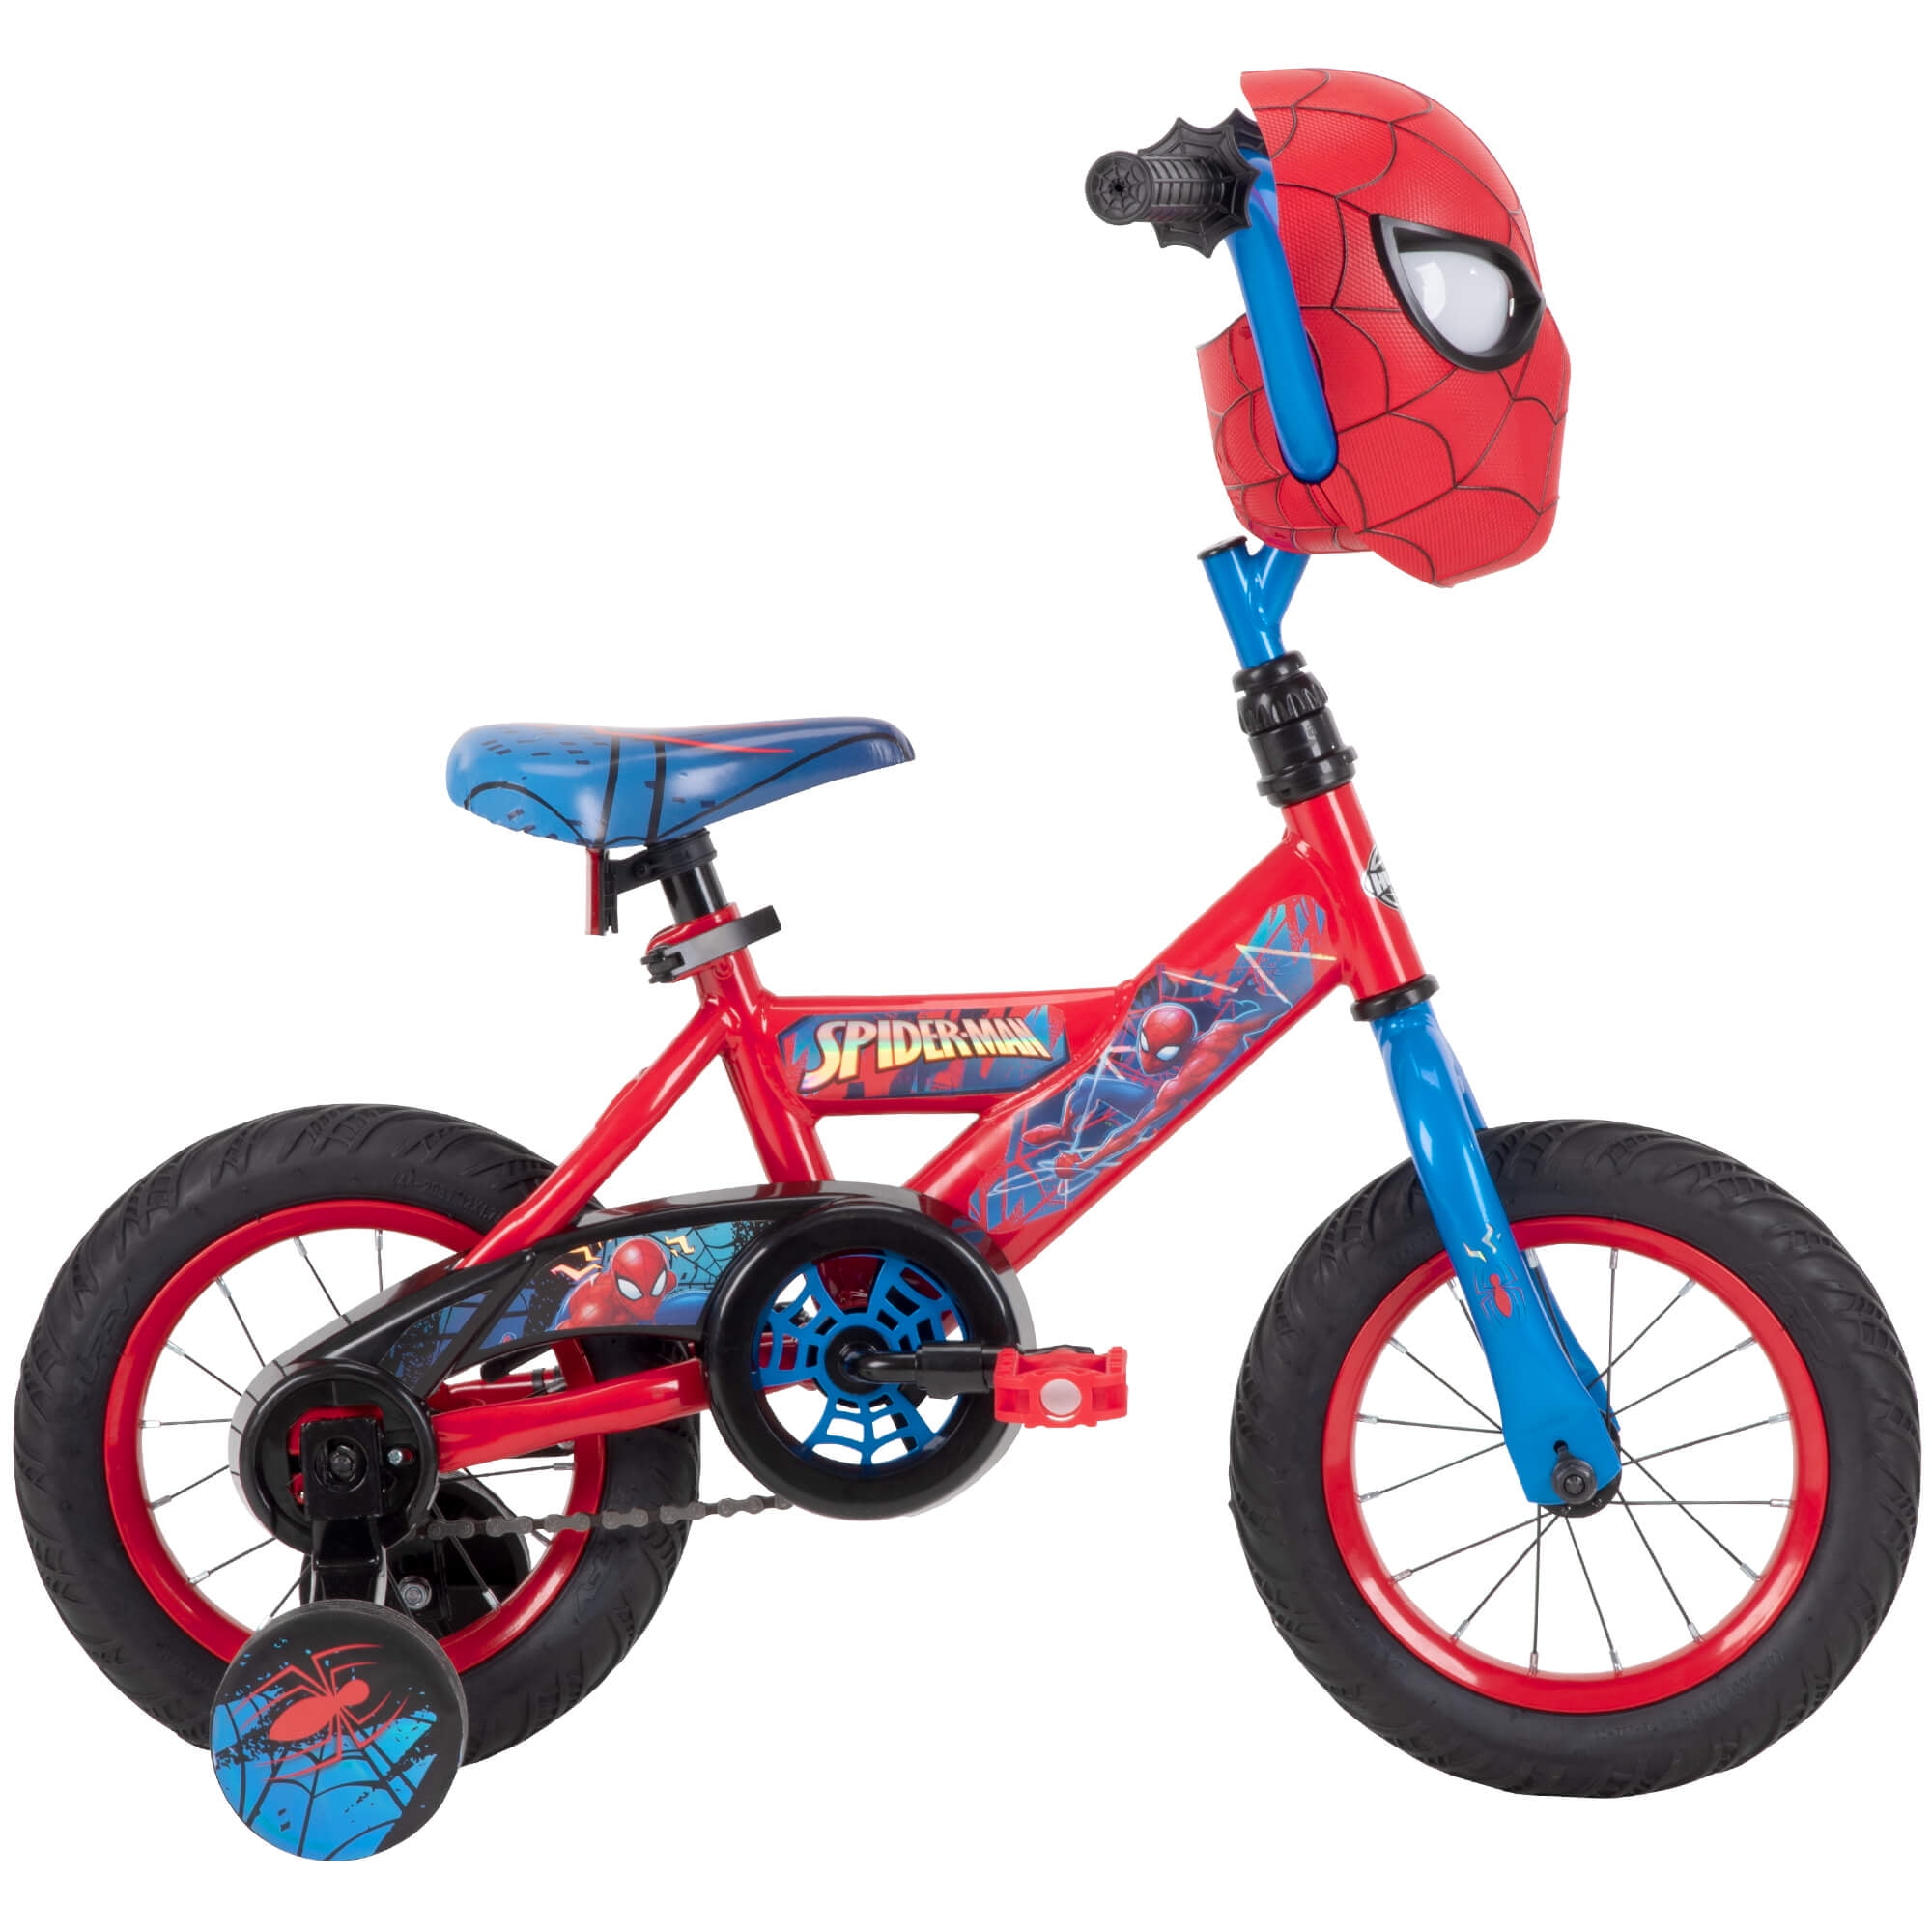 12 Marvel Spider-Man Bike with Training Wheels, for Boys', Red by Huffy